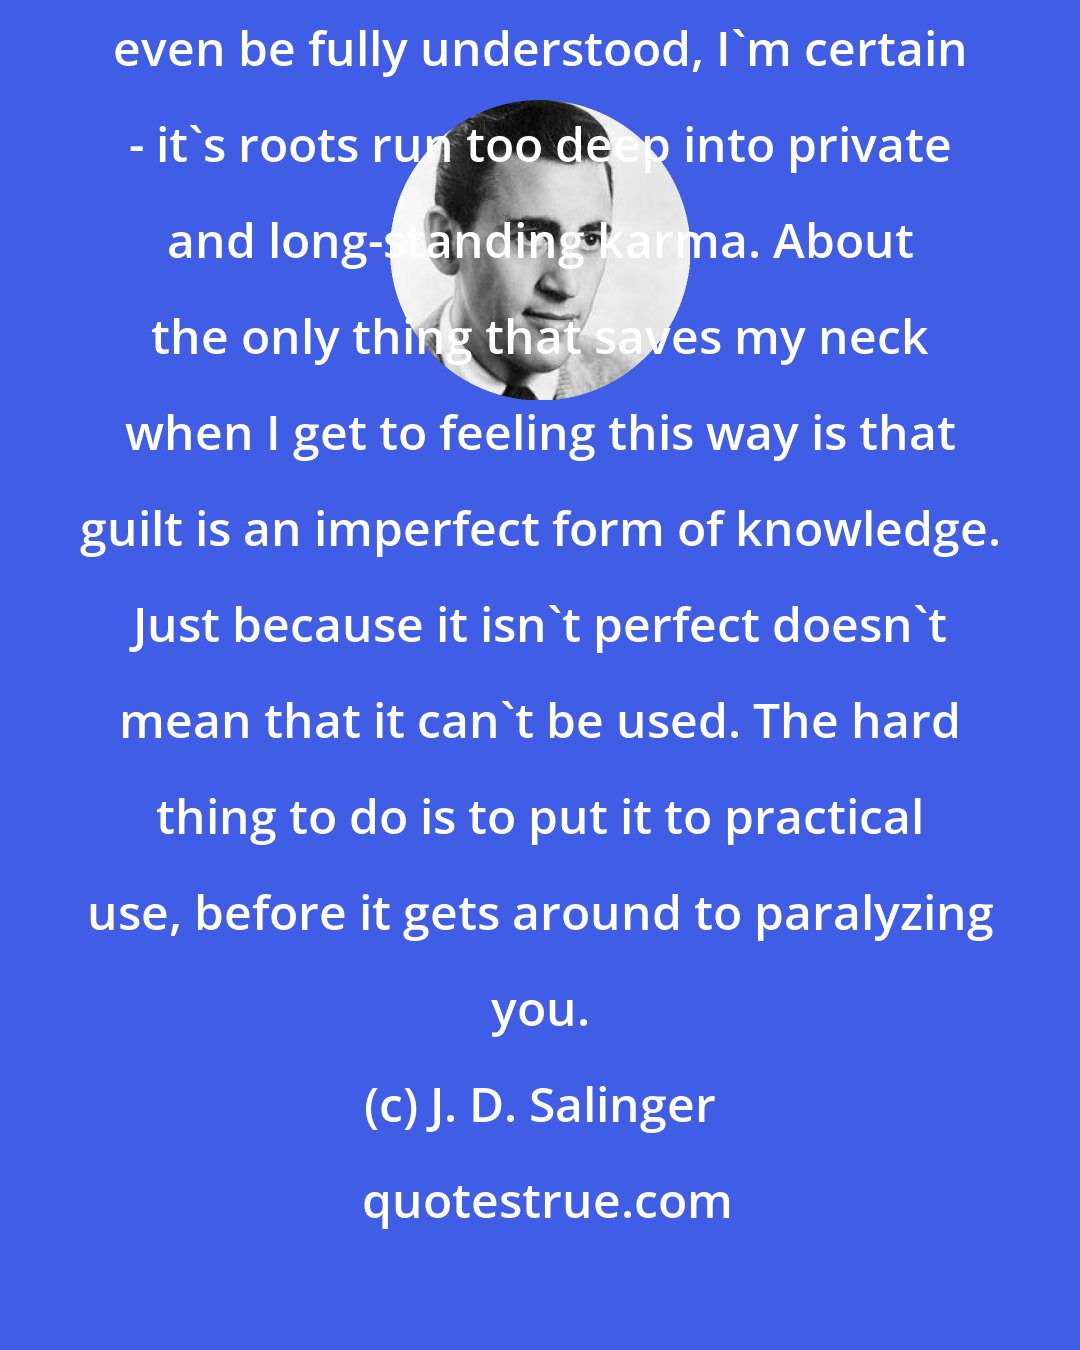 J. D. Salinger: But guilt is guilt. It doesn't go away. It can't be nullified. It can't even be fully understood, I'm certain - it's roots run too deep into private and long-standing karma. About the only thing that saves my neck when I get to feeling this way is that guilt is an imperfect form of knowledge. Just because it isn't perfect doesn't mean that it can't be used. The hard thing to do is to put it to practical use, before it gets around to paralyzing you.